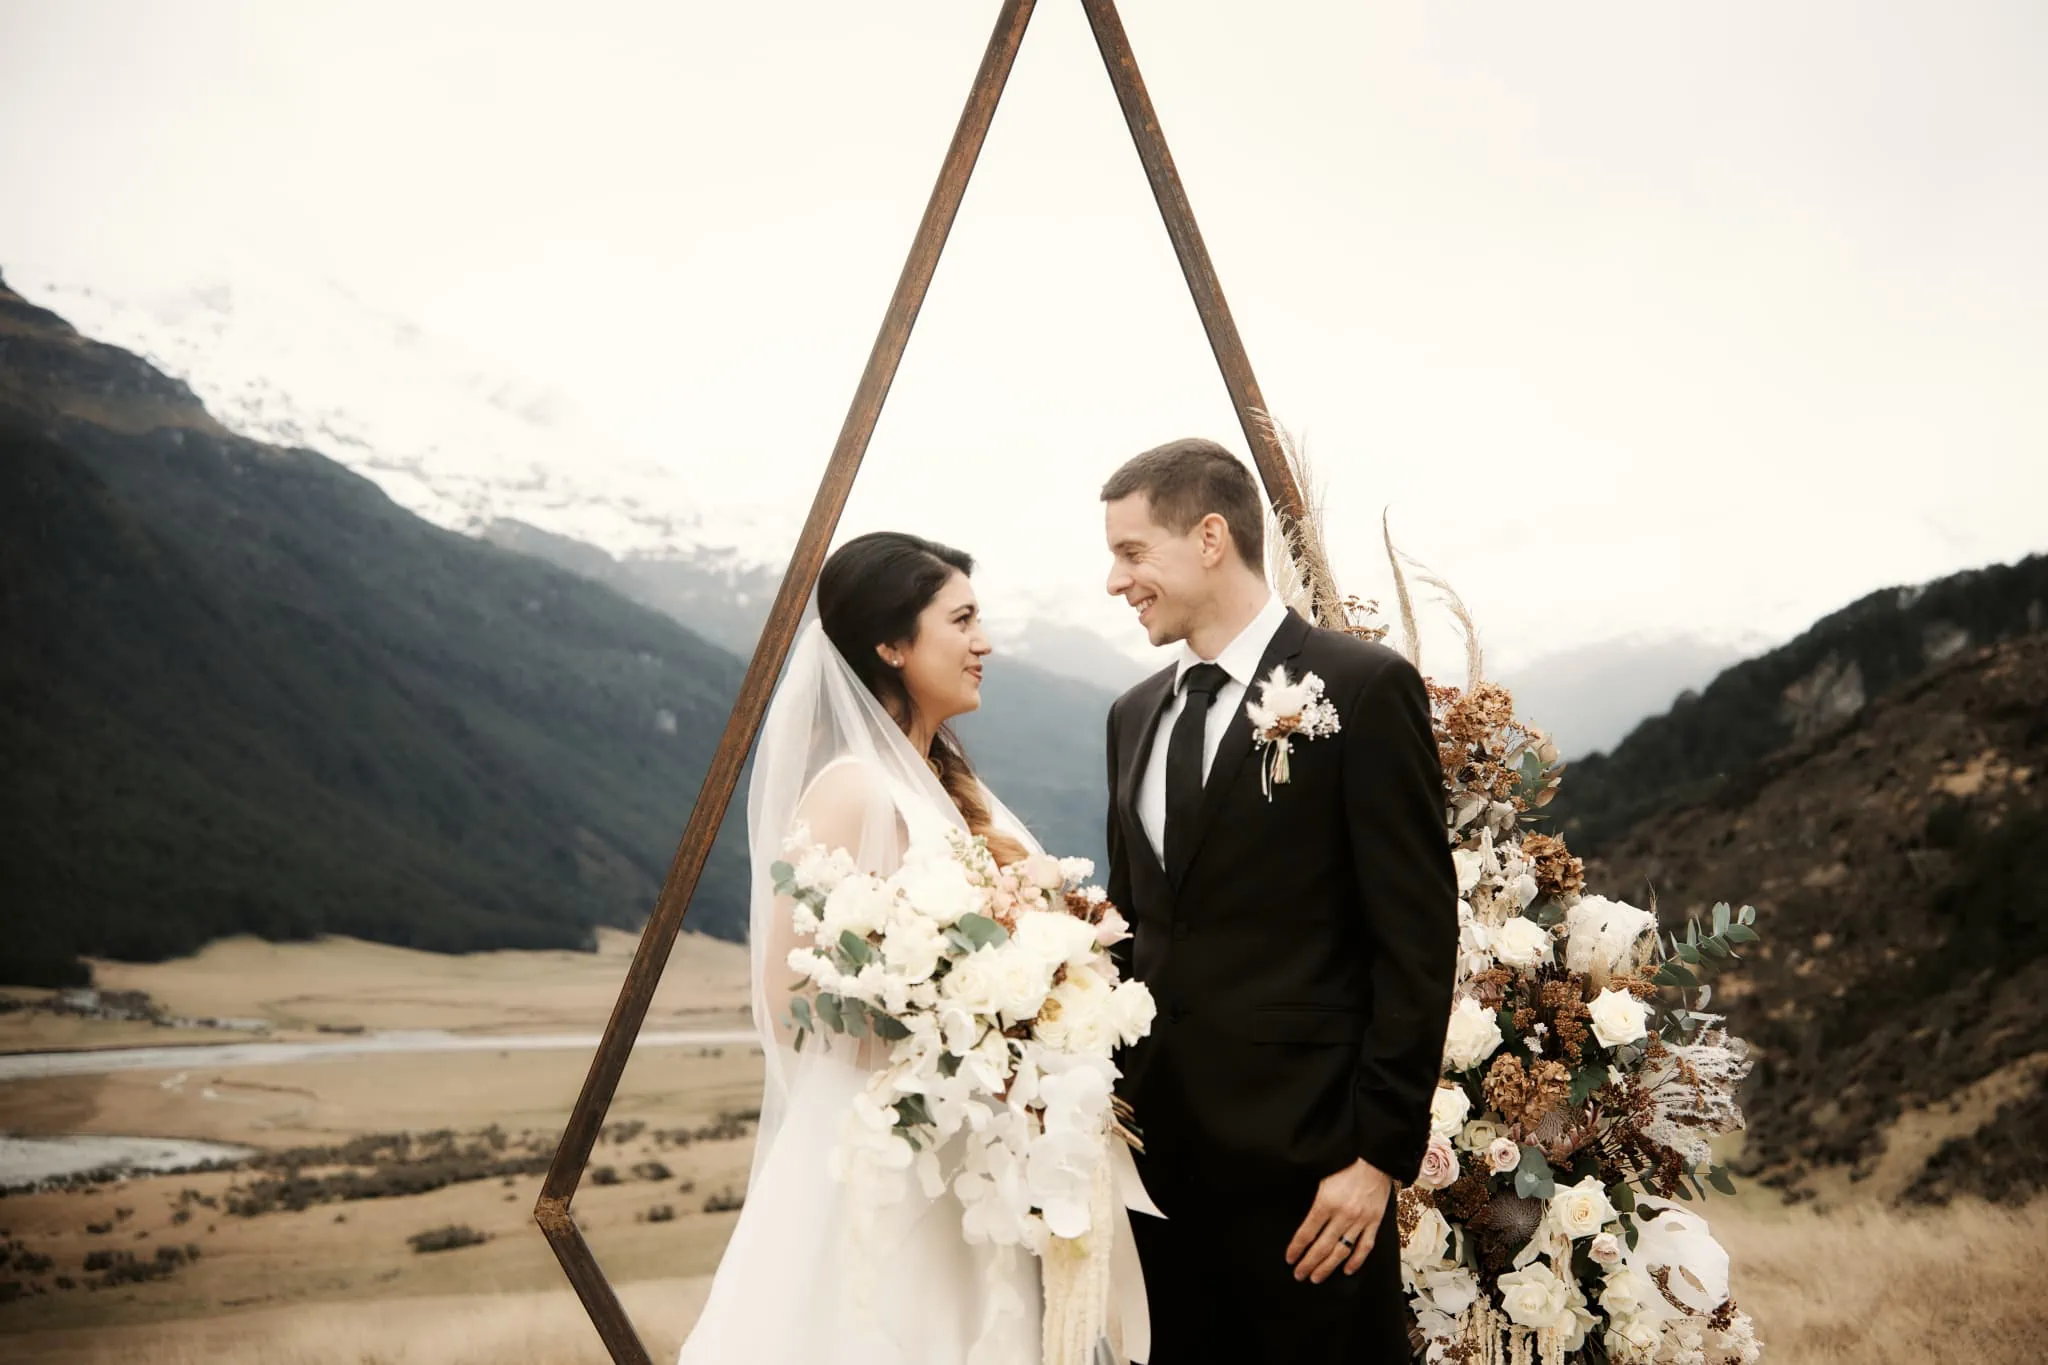 Michelle and Vedran at Rees Valley Station Elopement Wedding, standing in front of a geometric wedding arch.